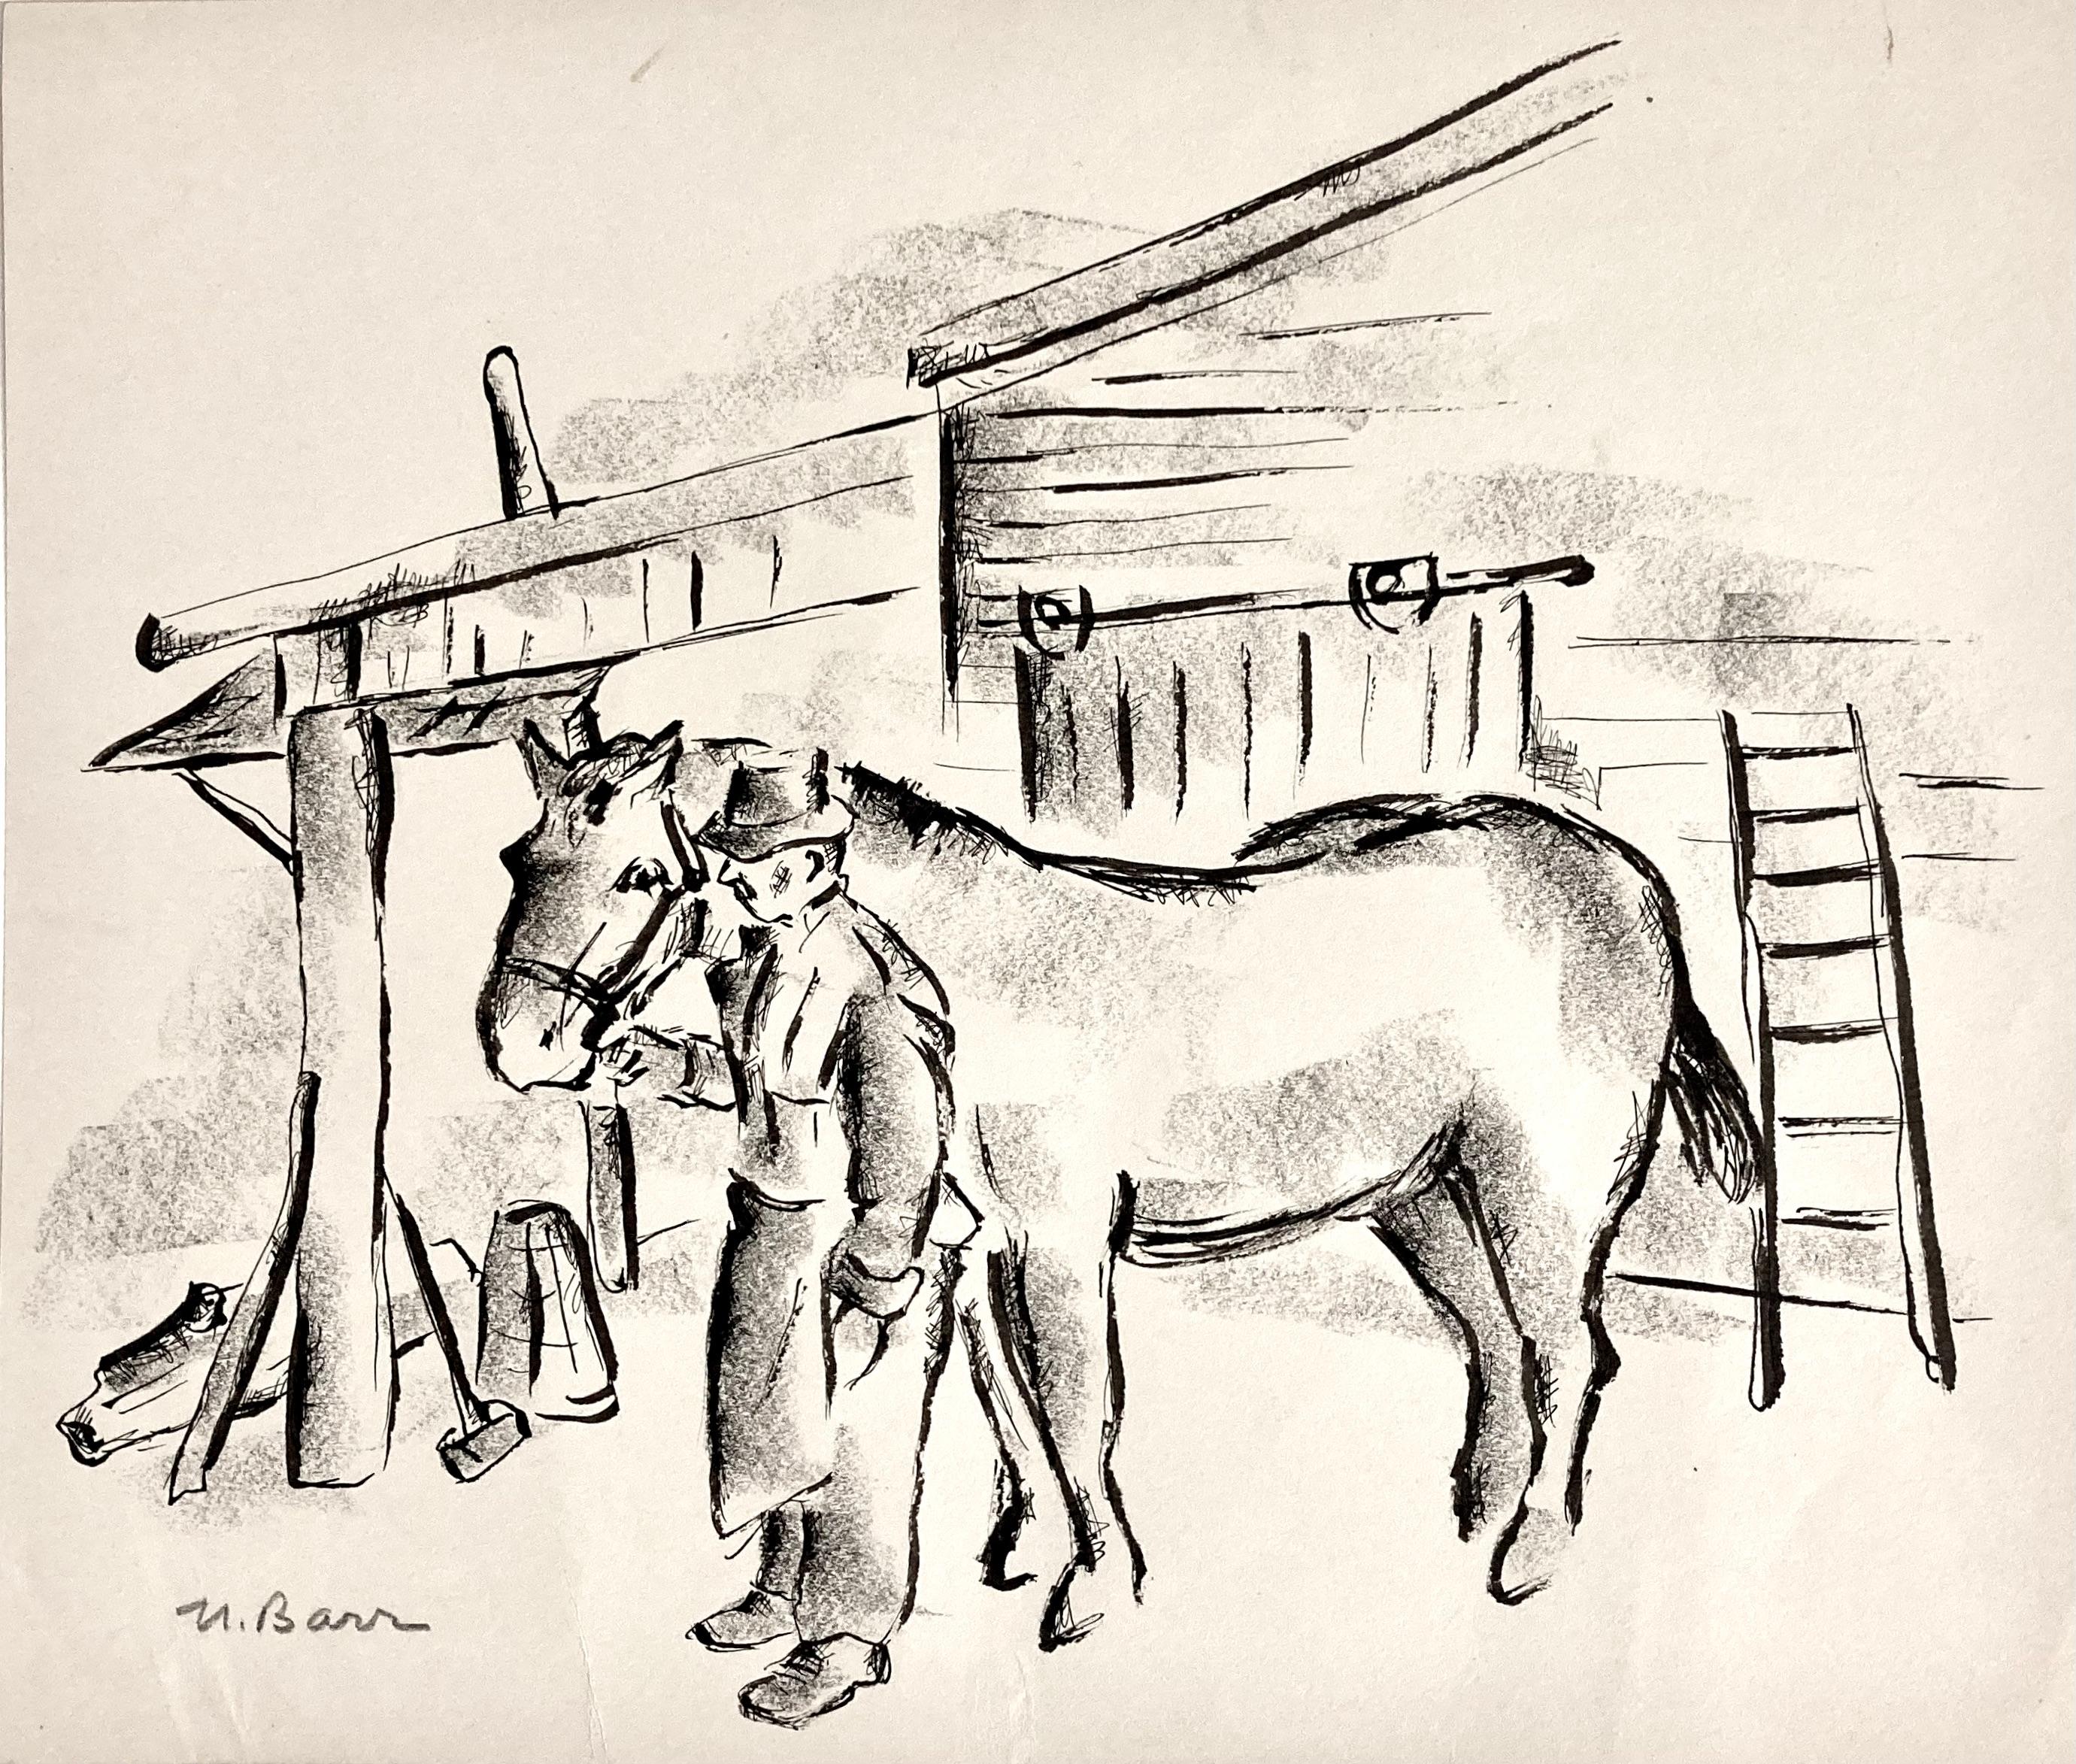 Norman Barr recorded his beloved New York City from the Bronx, to Coney Island, to the Fulton Fish Market. 

In this period he was on the New Deal's Mural Project. This drawing is signed in pencil and titled on the reverse in pencil.

